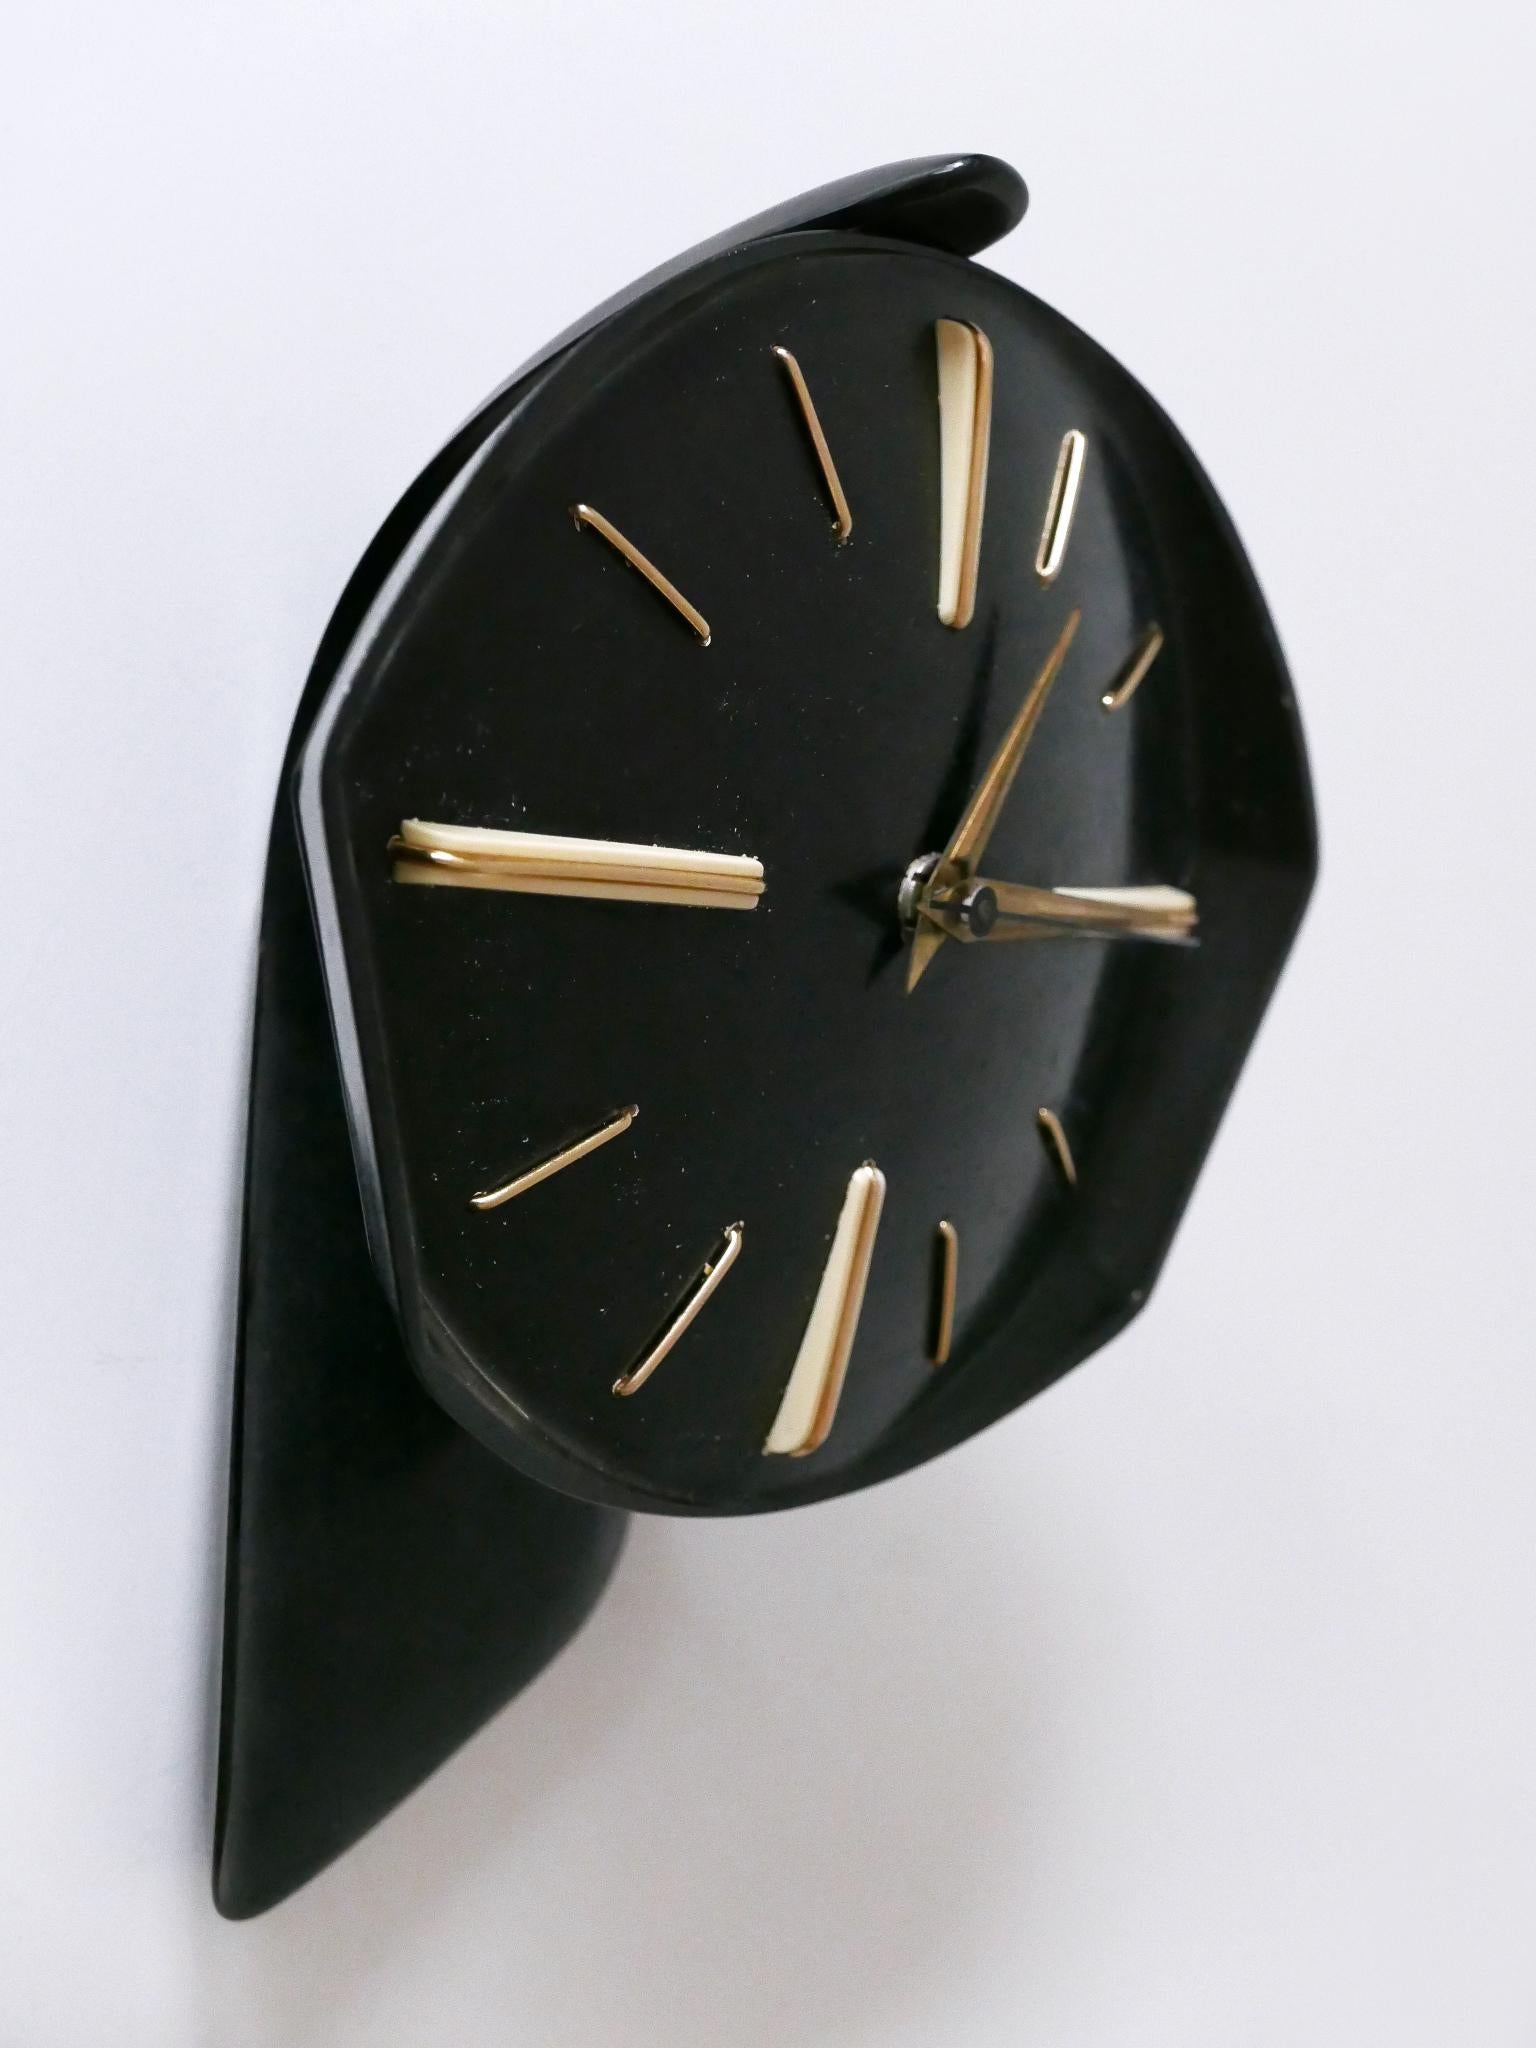 Mid-20th Century Rare and Lovely Mid-Century Modern Bakelite Table or Wall Clock by PRIM 1950s For Sale